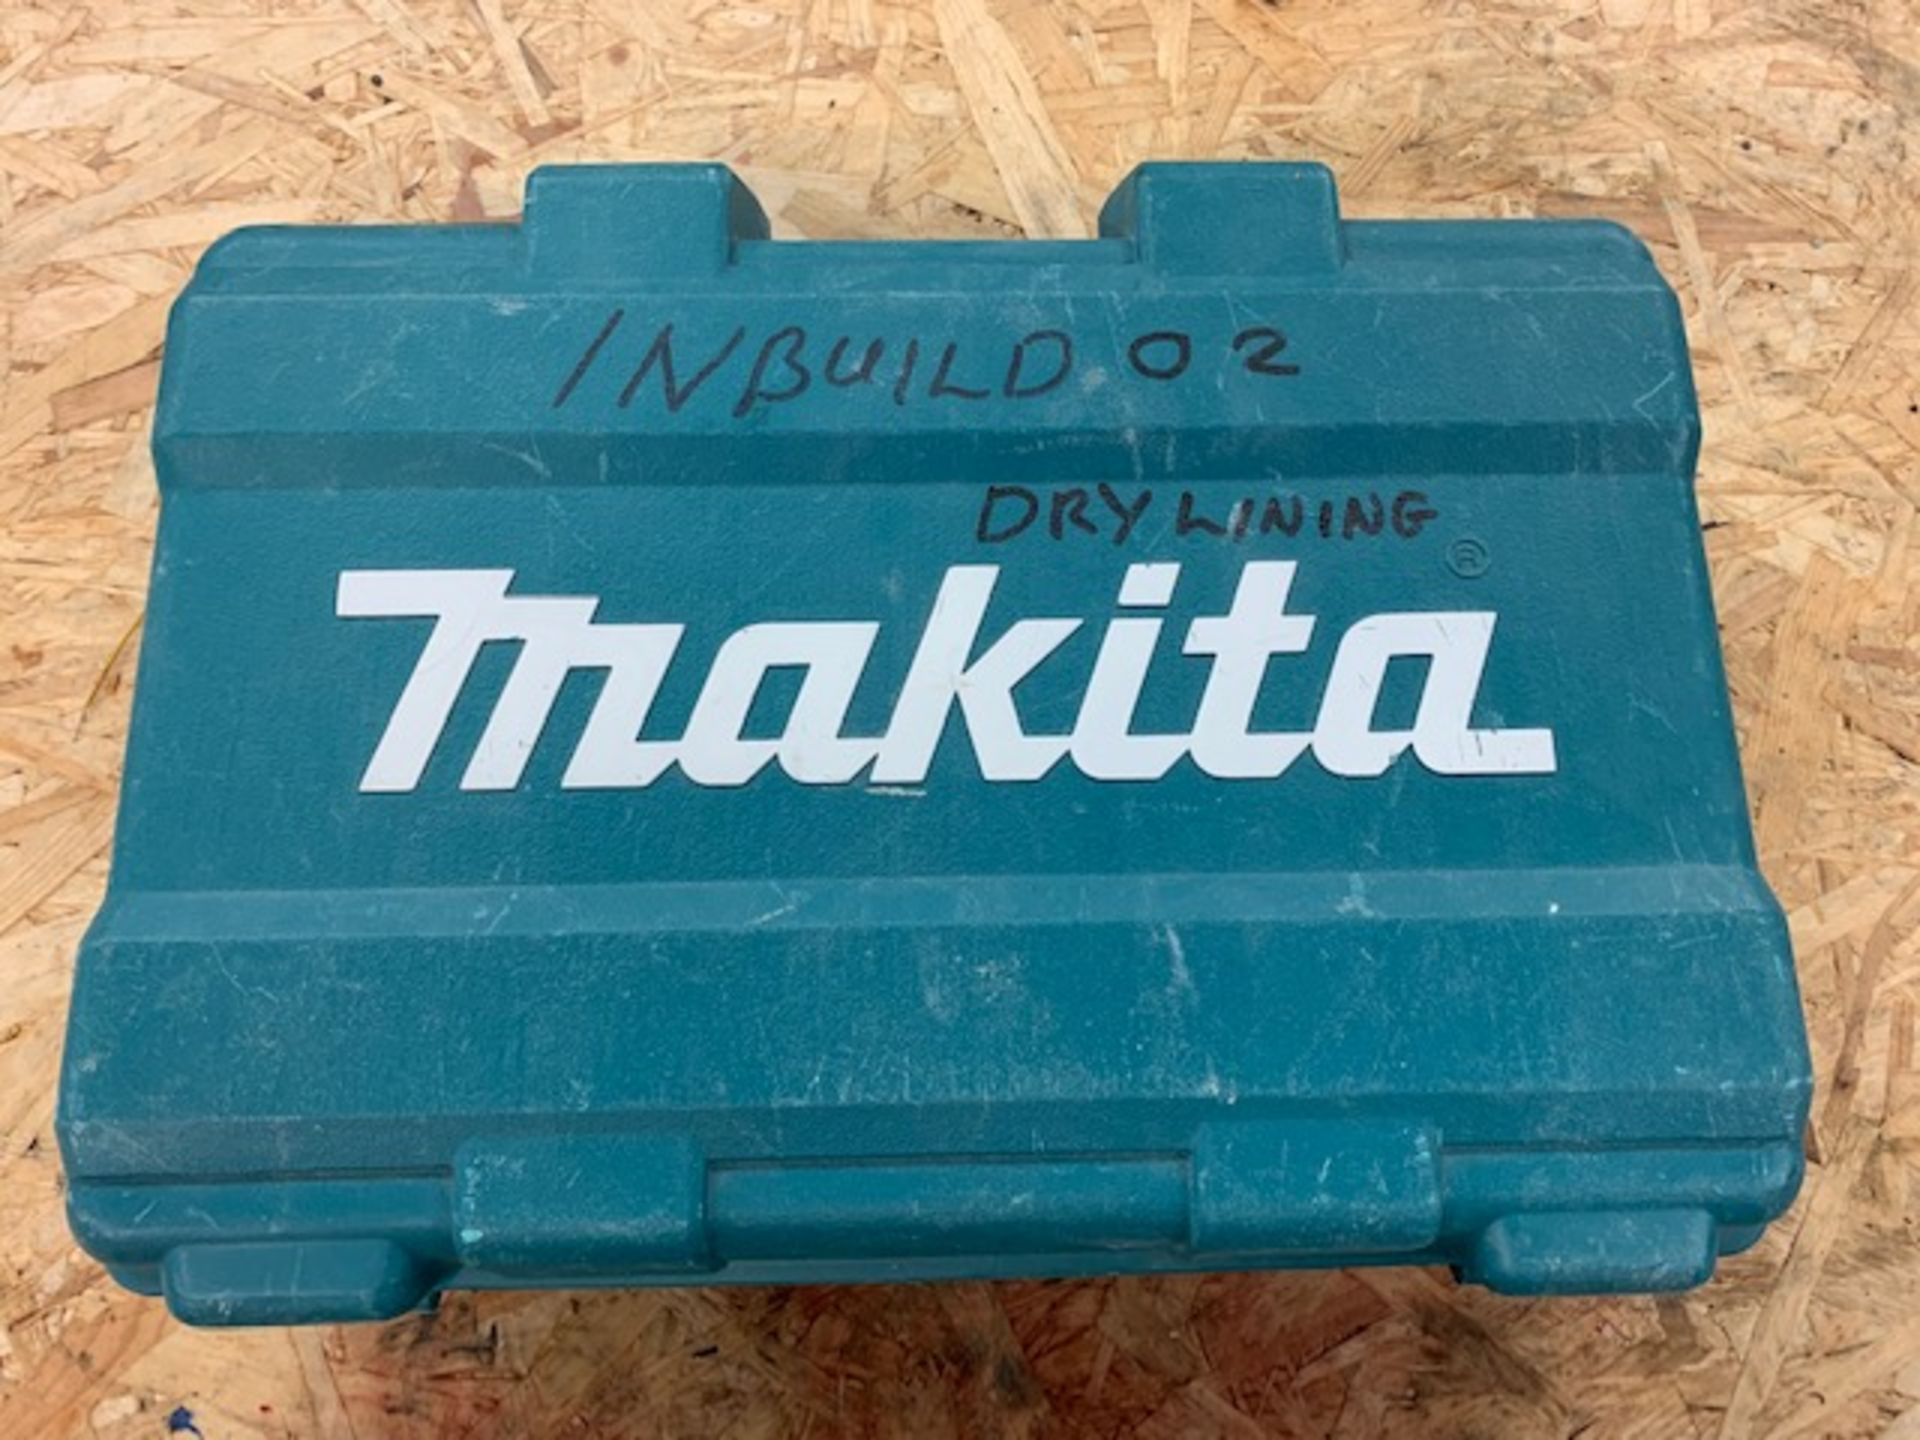 Makita TM30D cordless multi tool c/w 2x 2.0ah lithium batteries +DC10WD charge and case240v - Image 2 of 2